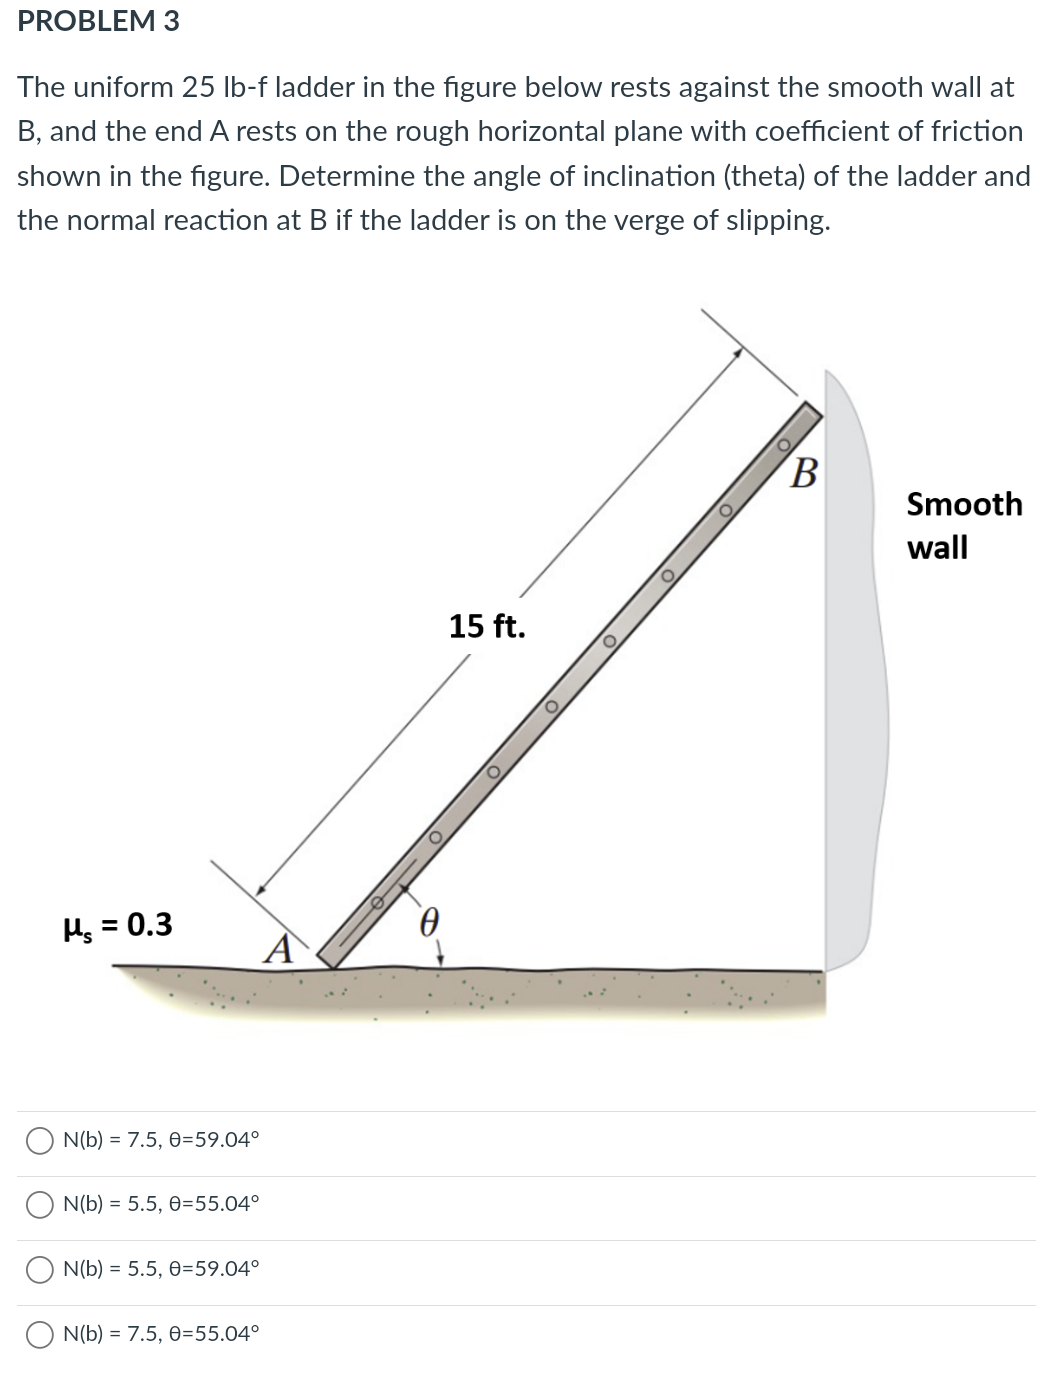 PROBLEM 3
The uniform 25 lb-f ladder in the figure below rests against the smooth wall at
B, and the end A rests on the rough horizontal plane with coefficient of friction
shown in the figure. Determine the angle of inclination (theta) of the ladder and
the normal reaction at B if the ladder is on the verge of slipping.
B
Smooth
wall
15 ft.
Hg = 0.3
A
N(b) = 7.5, 0=59.04°
N(b) = 5.5, 0=55.04°
N(b) = 5.5, 0=59.04°
N(b) = 7.5, 0=55.04°
